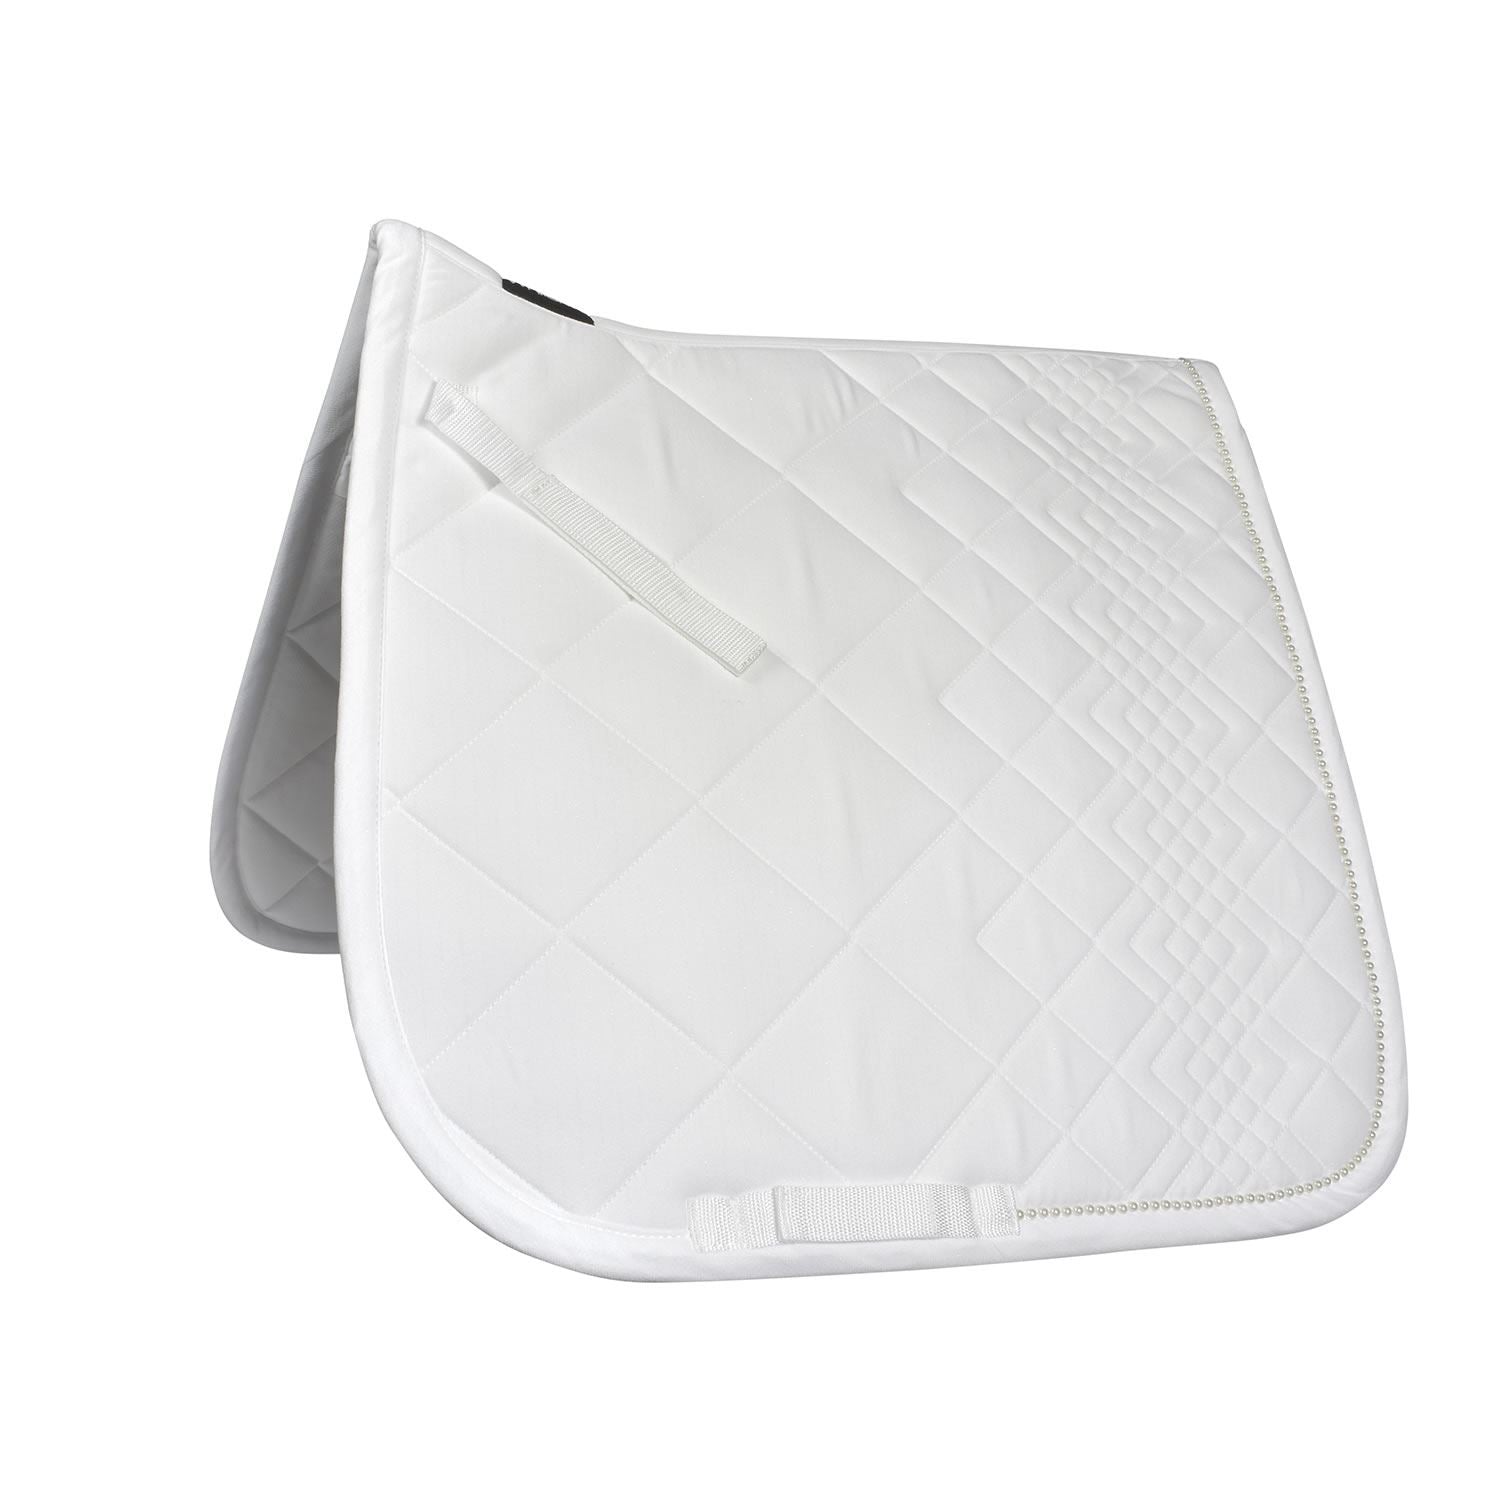 Whitaker Carnaby Dressage Saddle Pad - Just Horse Riders